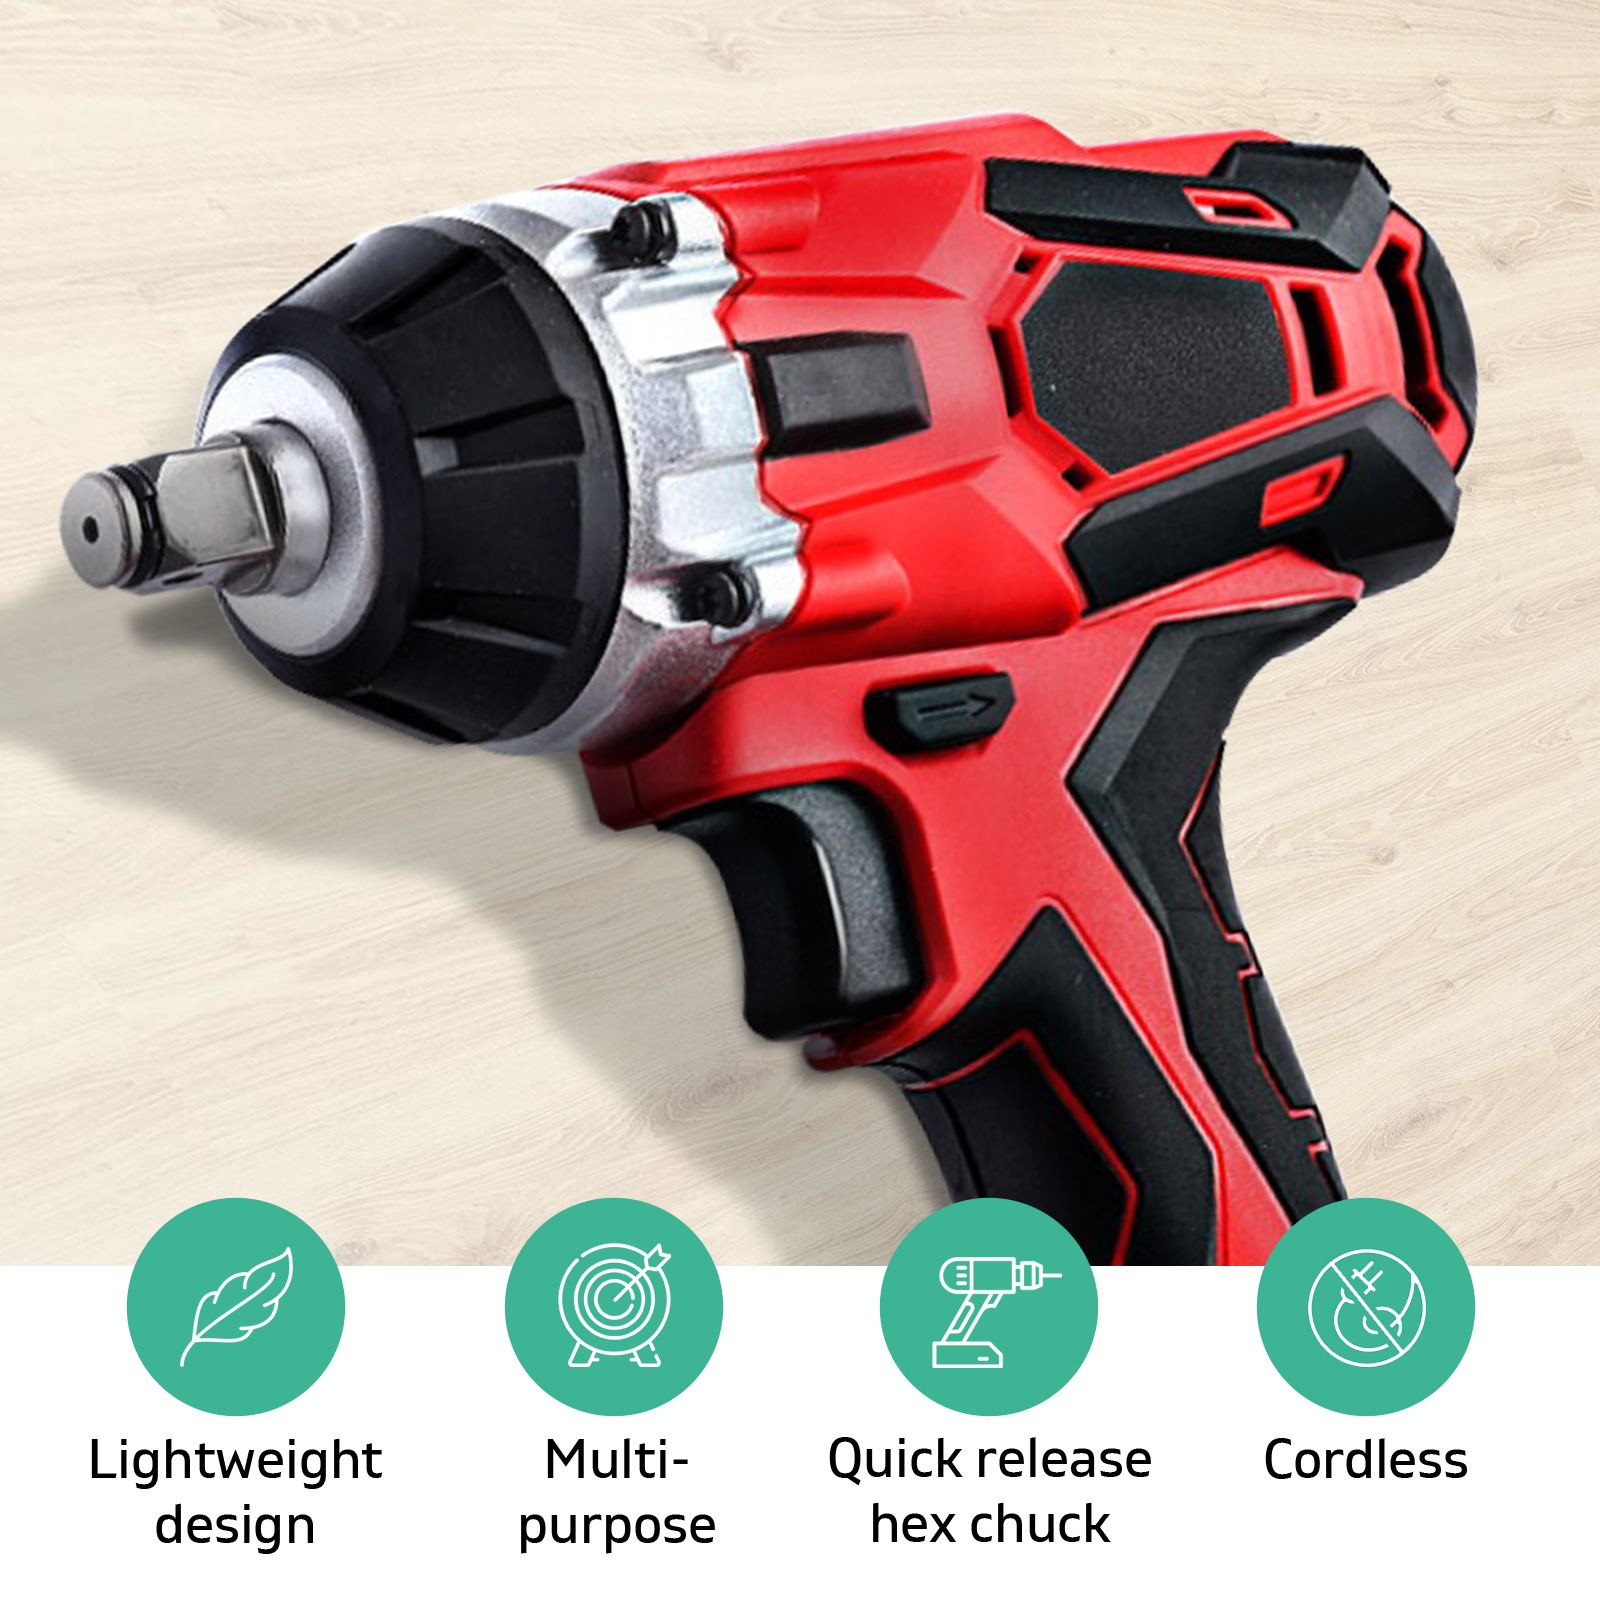 Impact Wrench 20V Cordless Rattle Gun Sockets Lithium-Ion Battery 